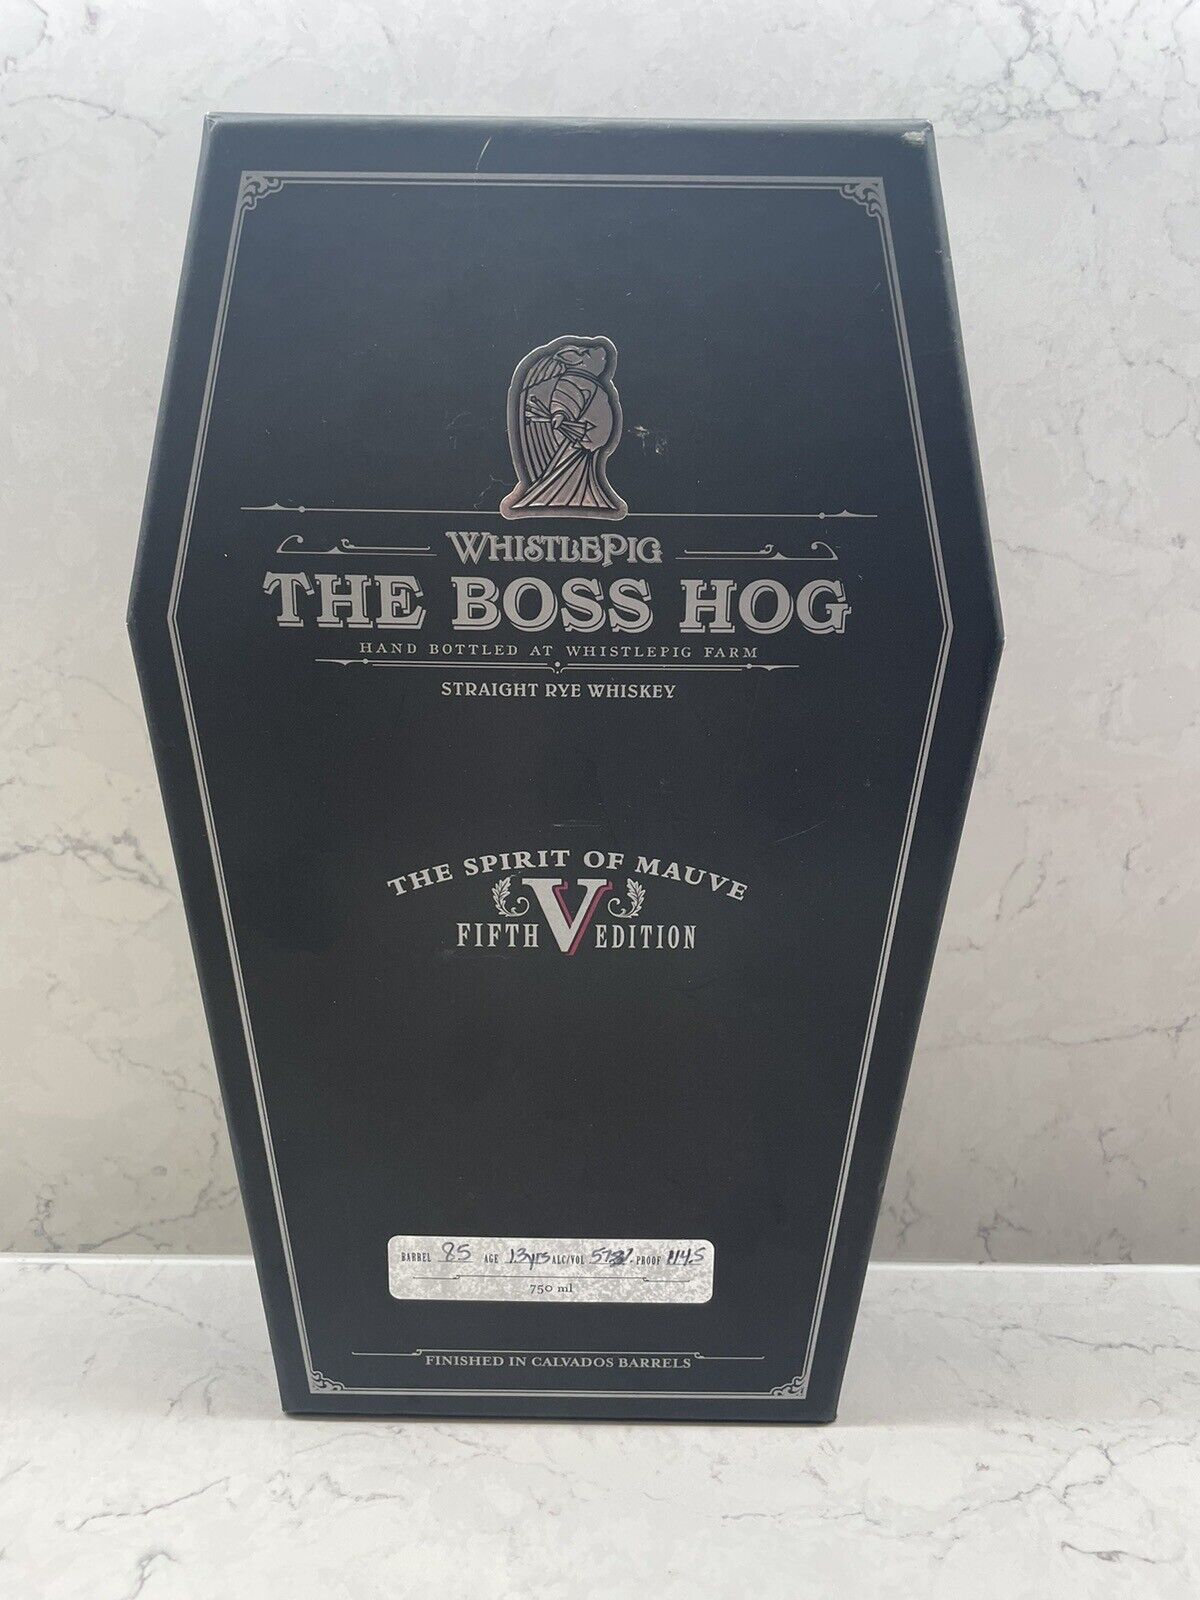 WhistlePig The Boss Hog V Fifth Edition The Spirit Of Mauve Empty Bottle And Box